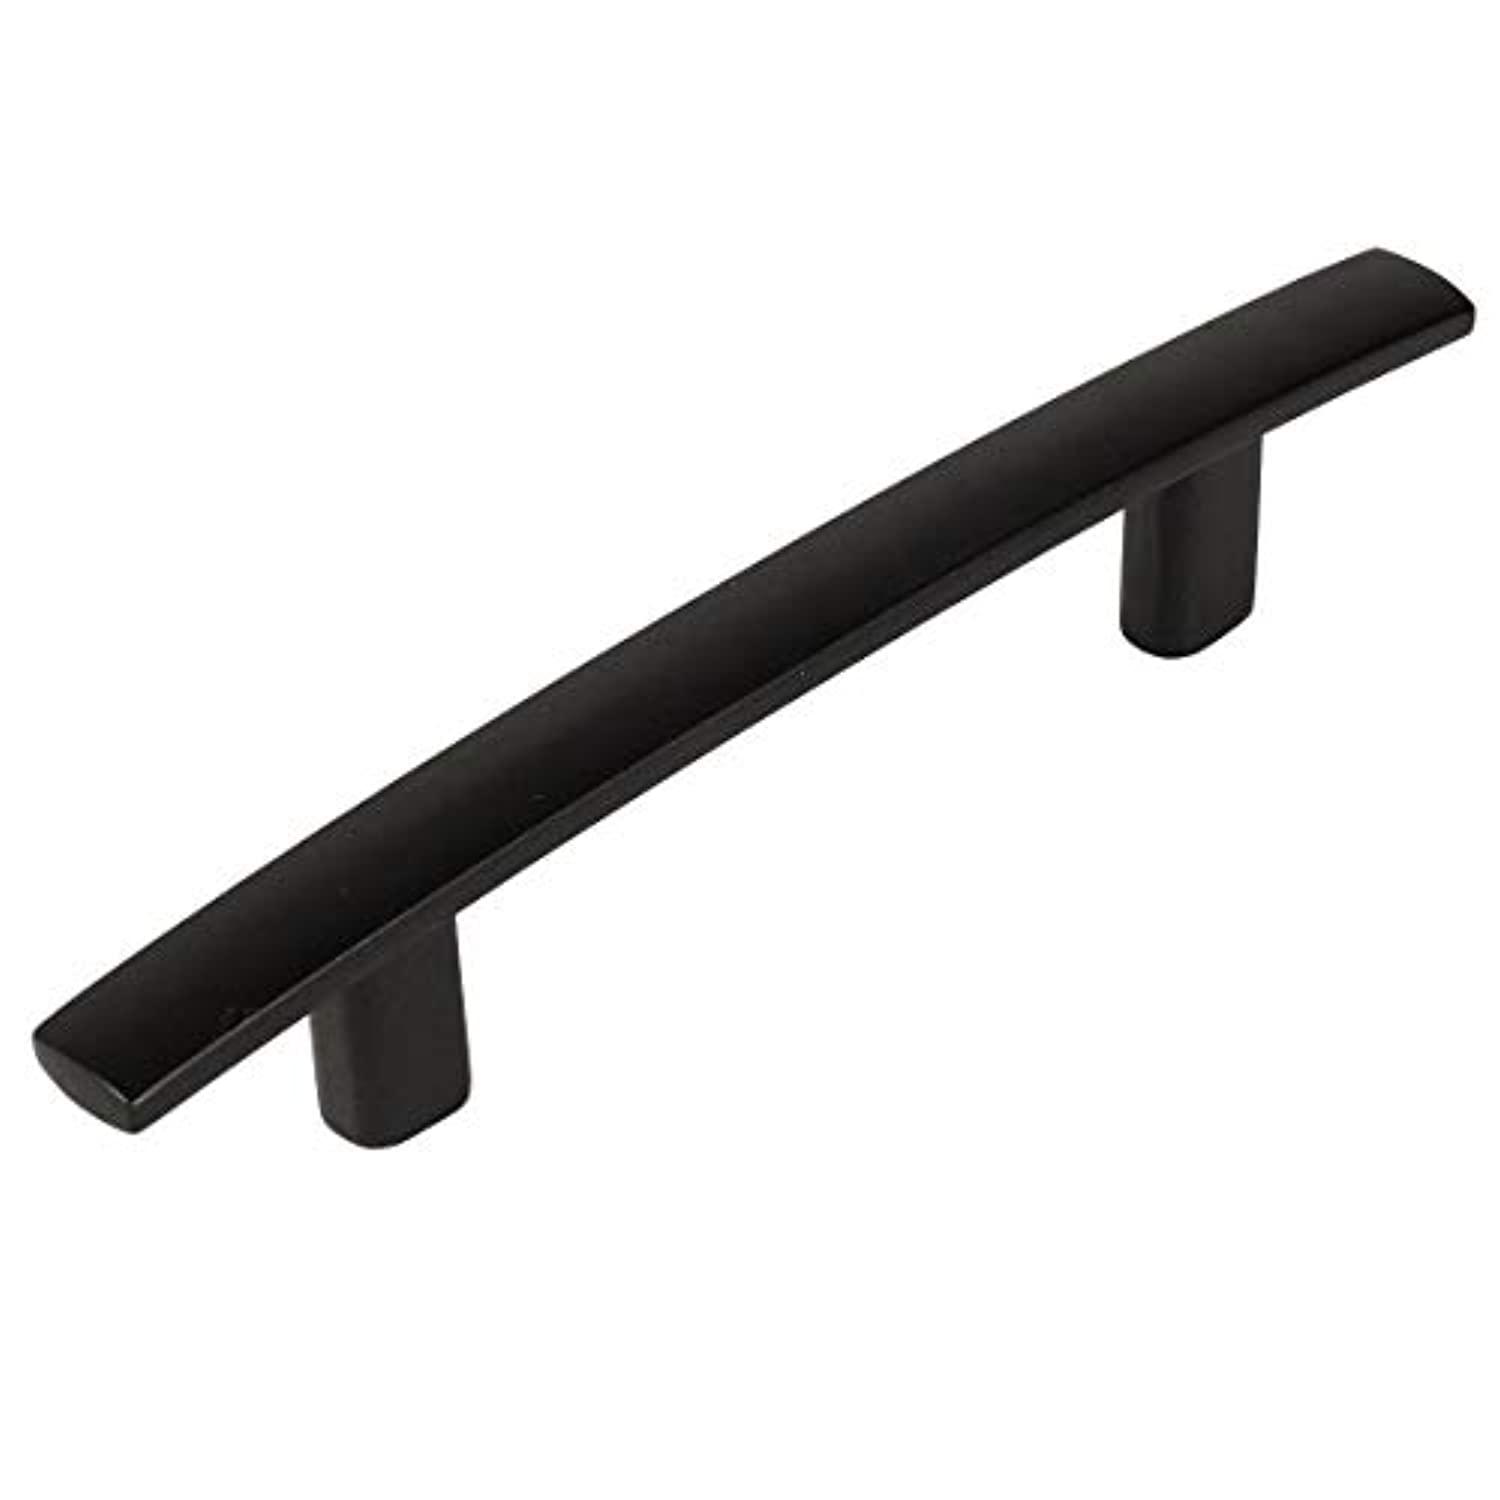 COSMAS 10 pack - cosmas 2363-3.5fb flat black subtle arch cabinet hardware handle pull - 3-1/2" inch (89mm) hole centers